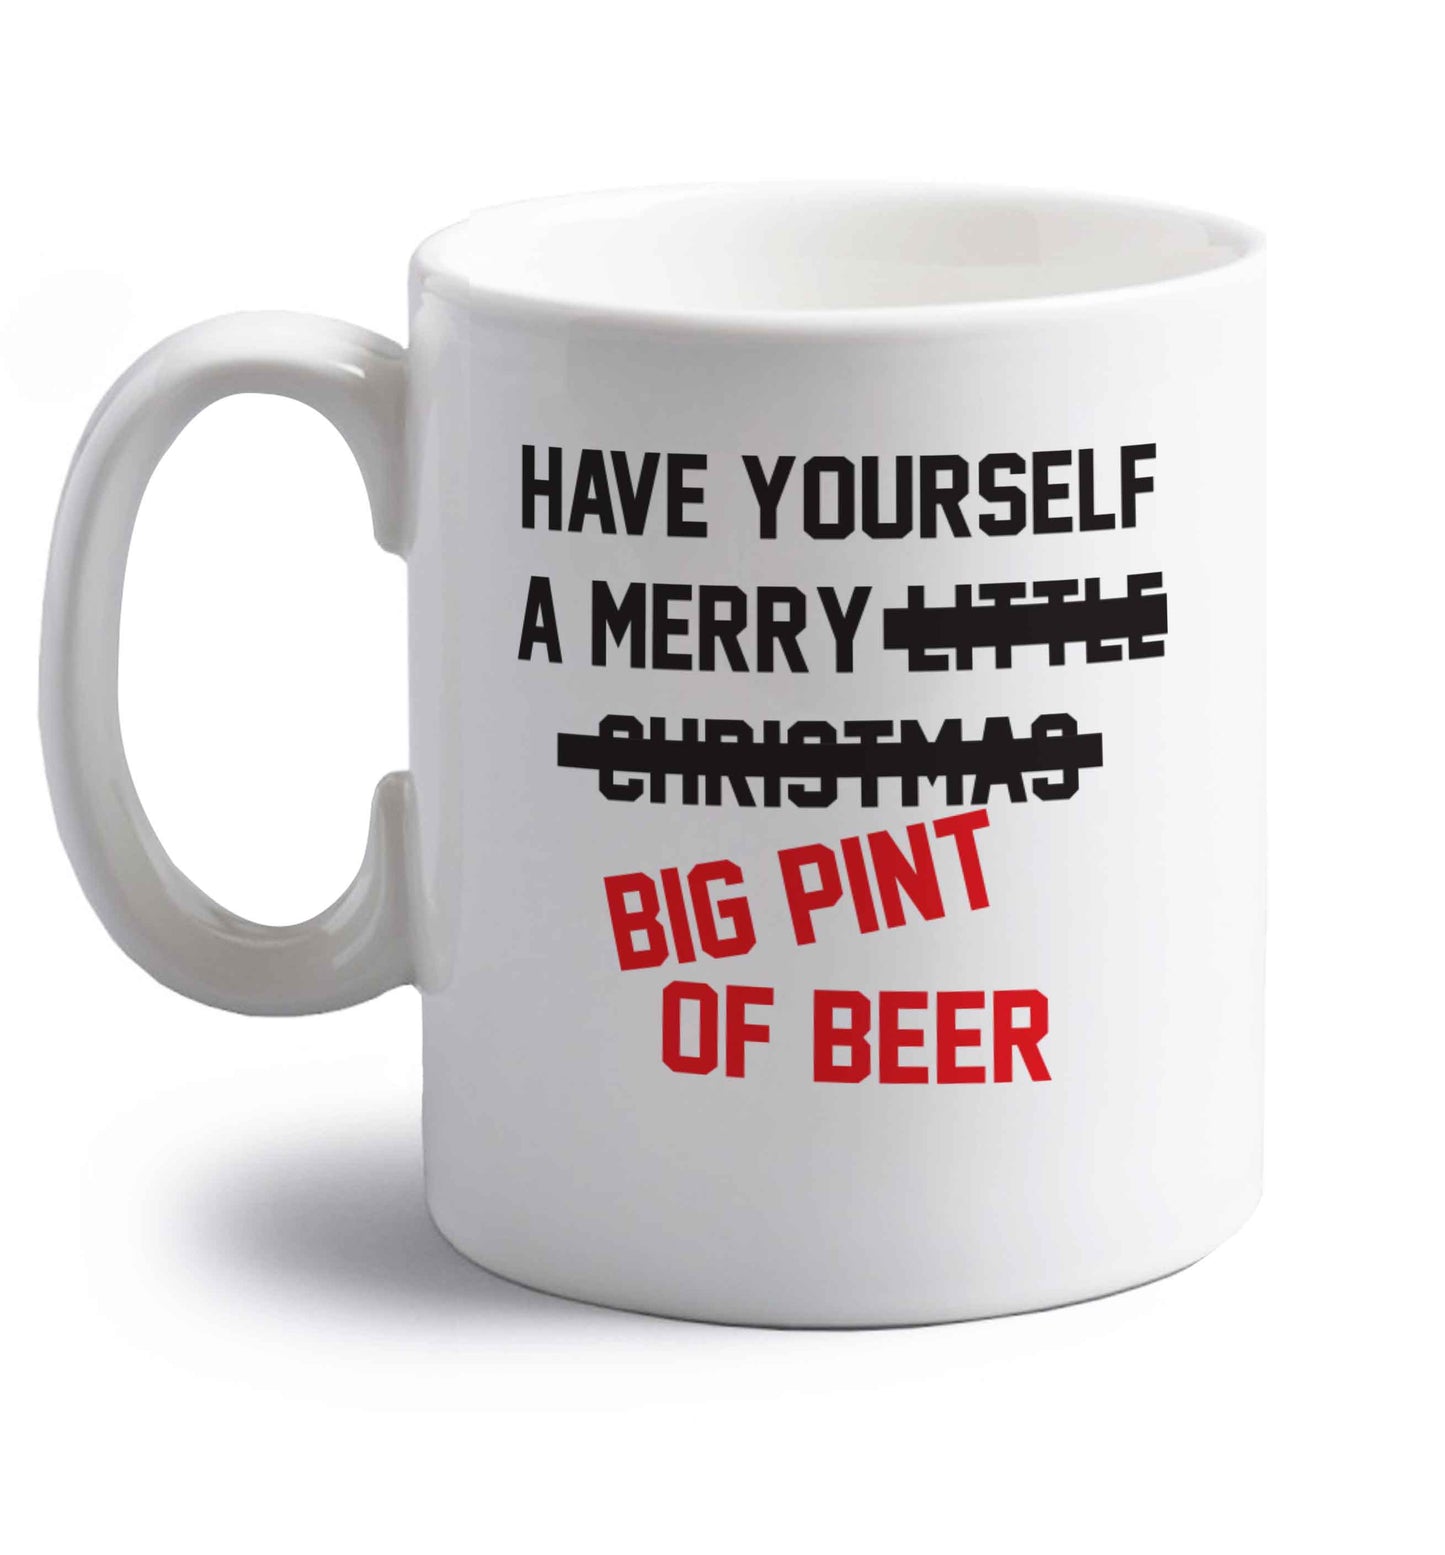 Have yourself a merry big pint of beer right handed white ceramic mug 